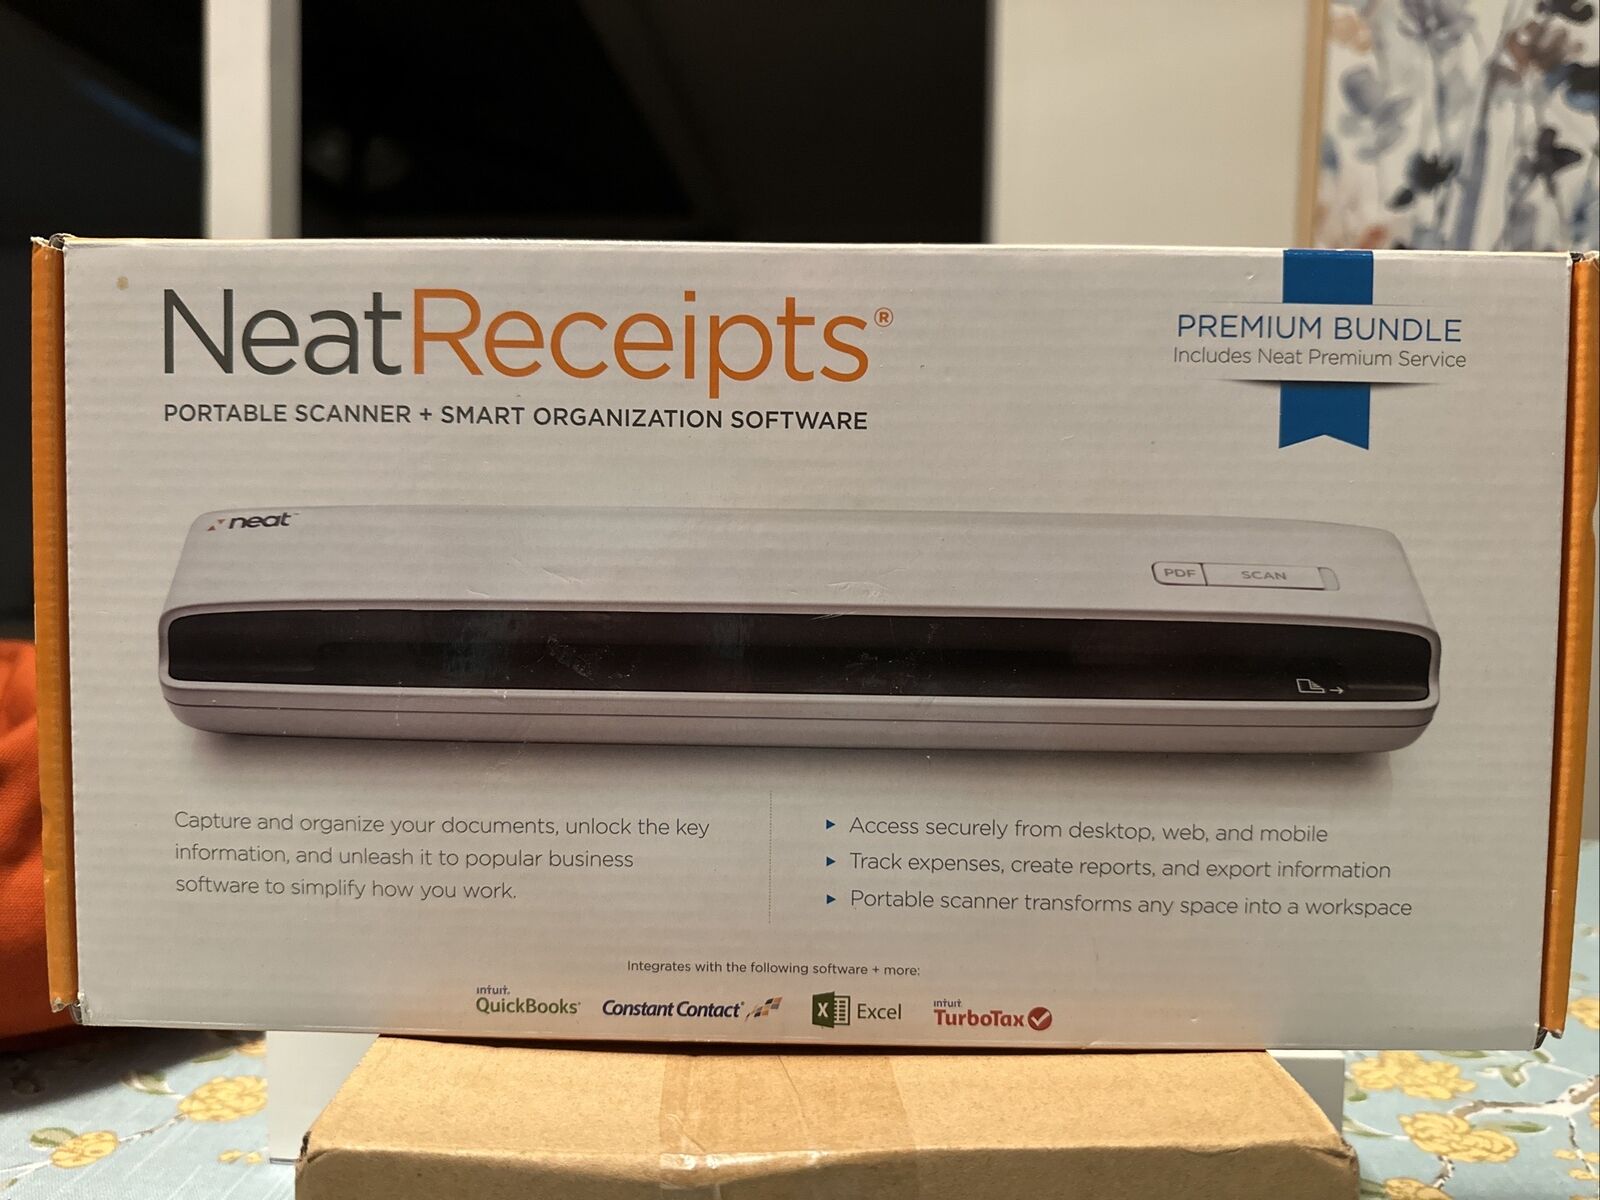 NEAT RECEIPTS Scanner  Open Box NEATRECEIPTS NM 1000 MOBILE SCANNER